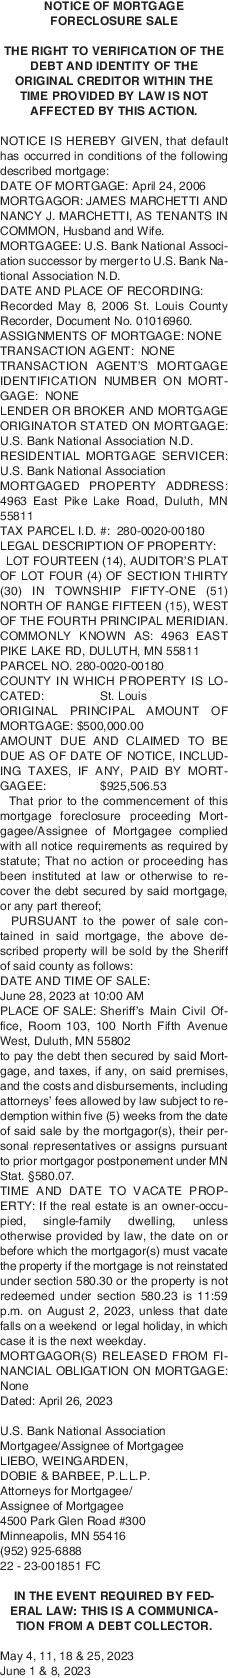 NOTICE OF MORTGAGE FORECLOSURE SALE THE